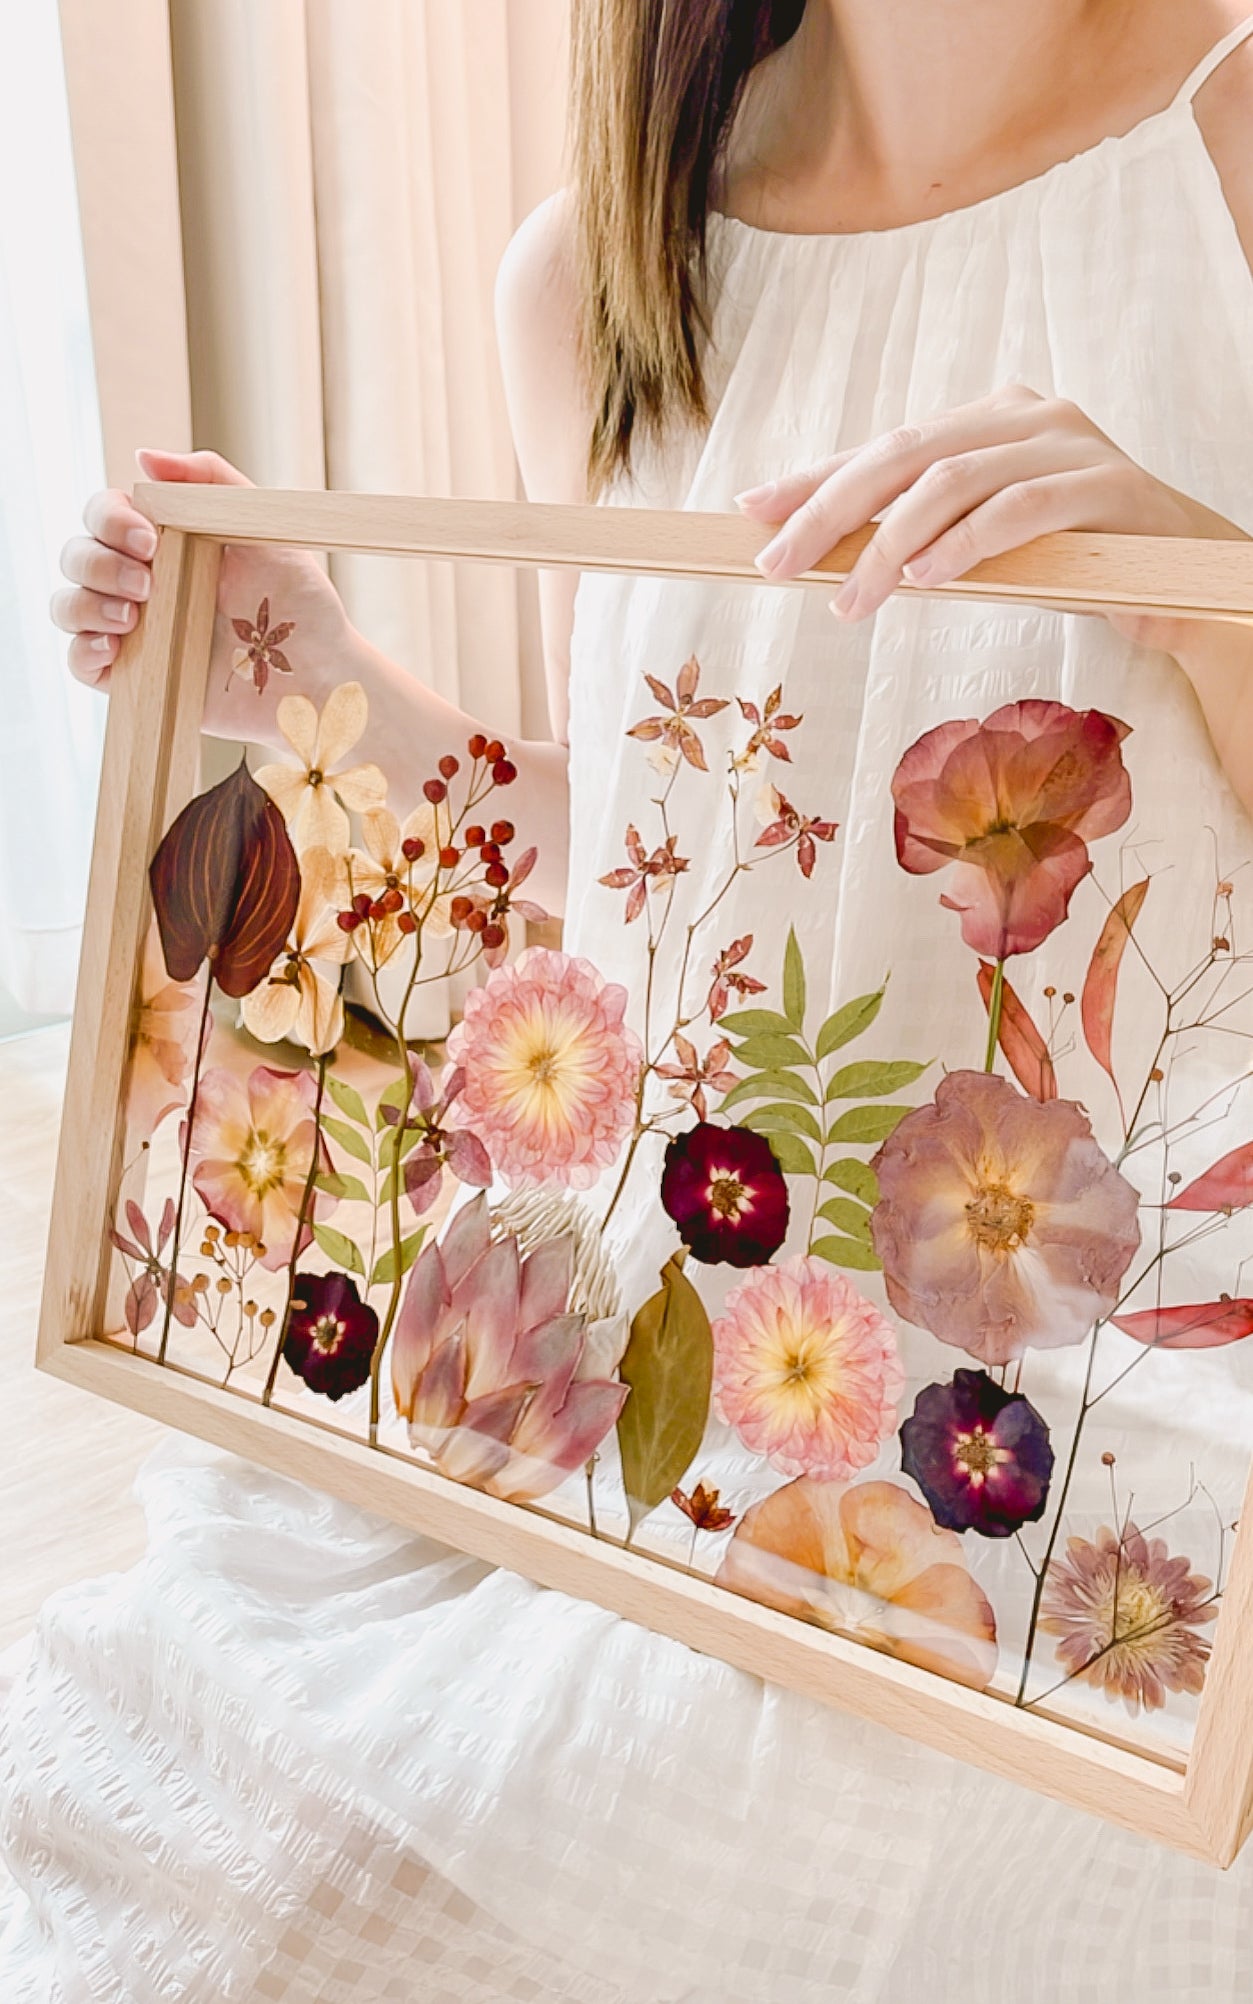 A person holder a bridal/wedding pressed flower in wooden frame